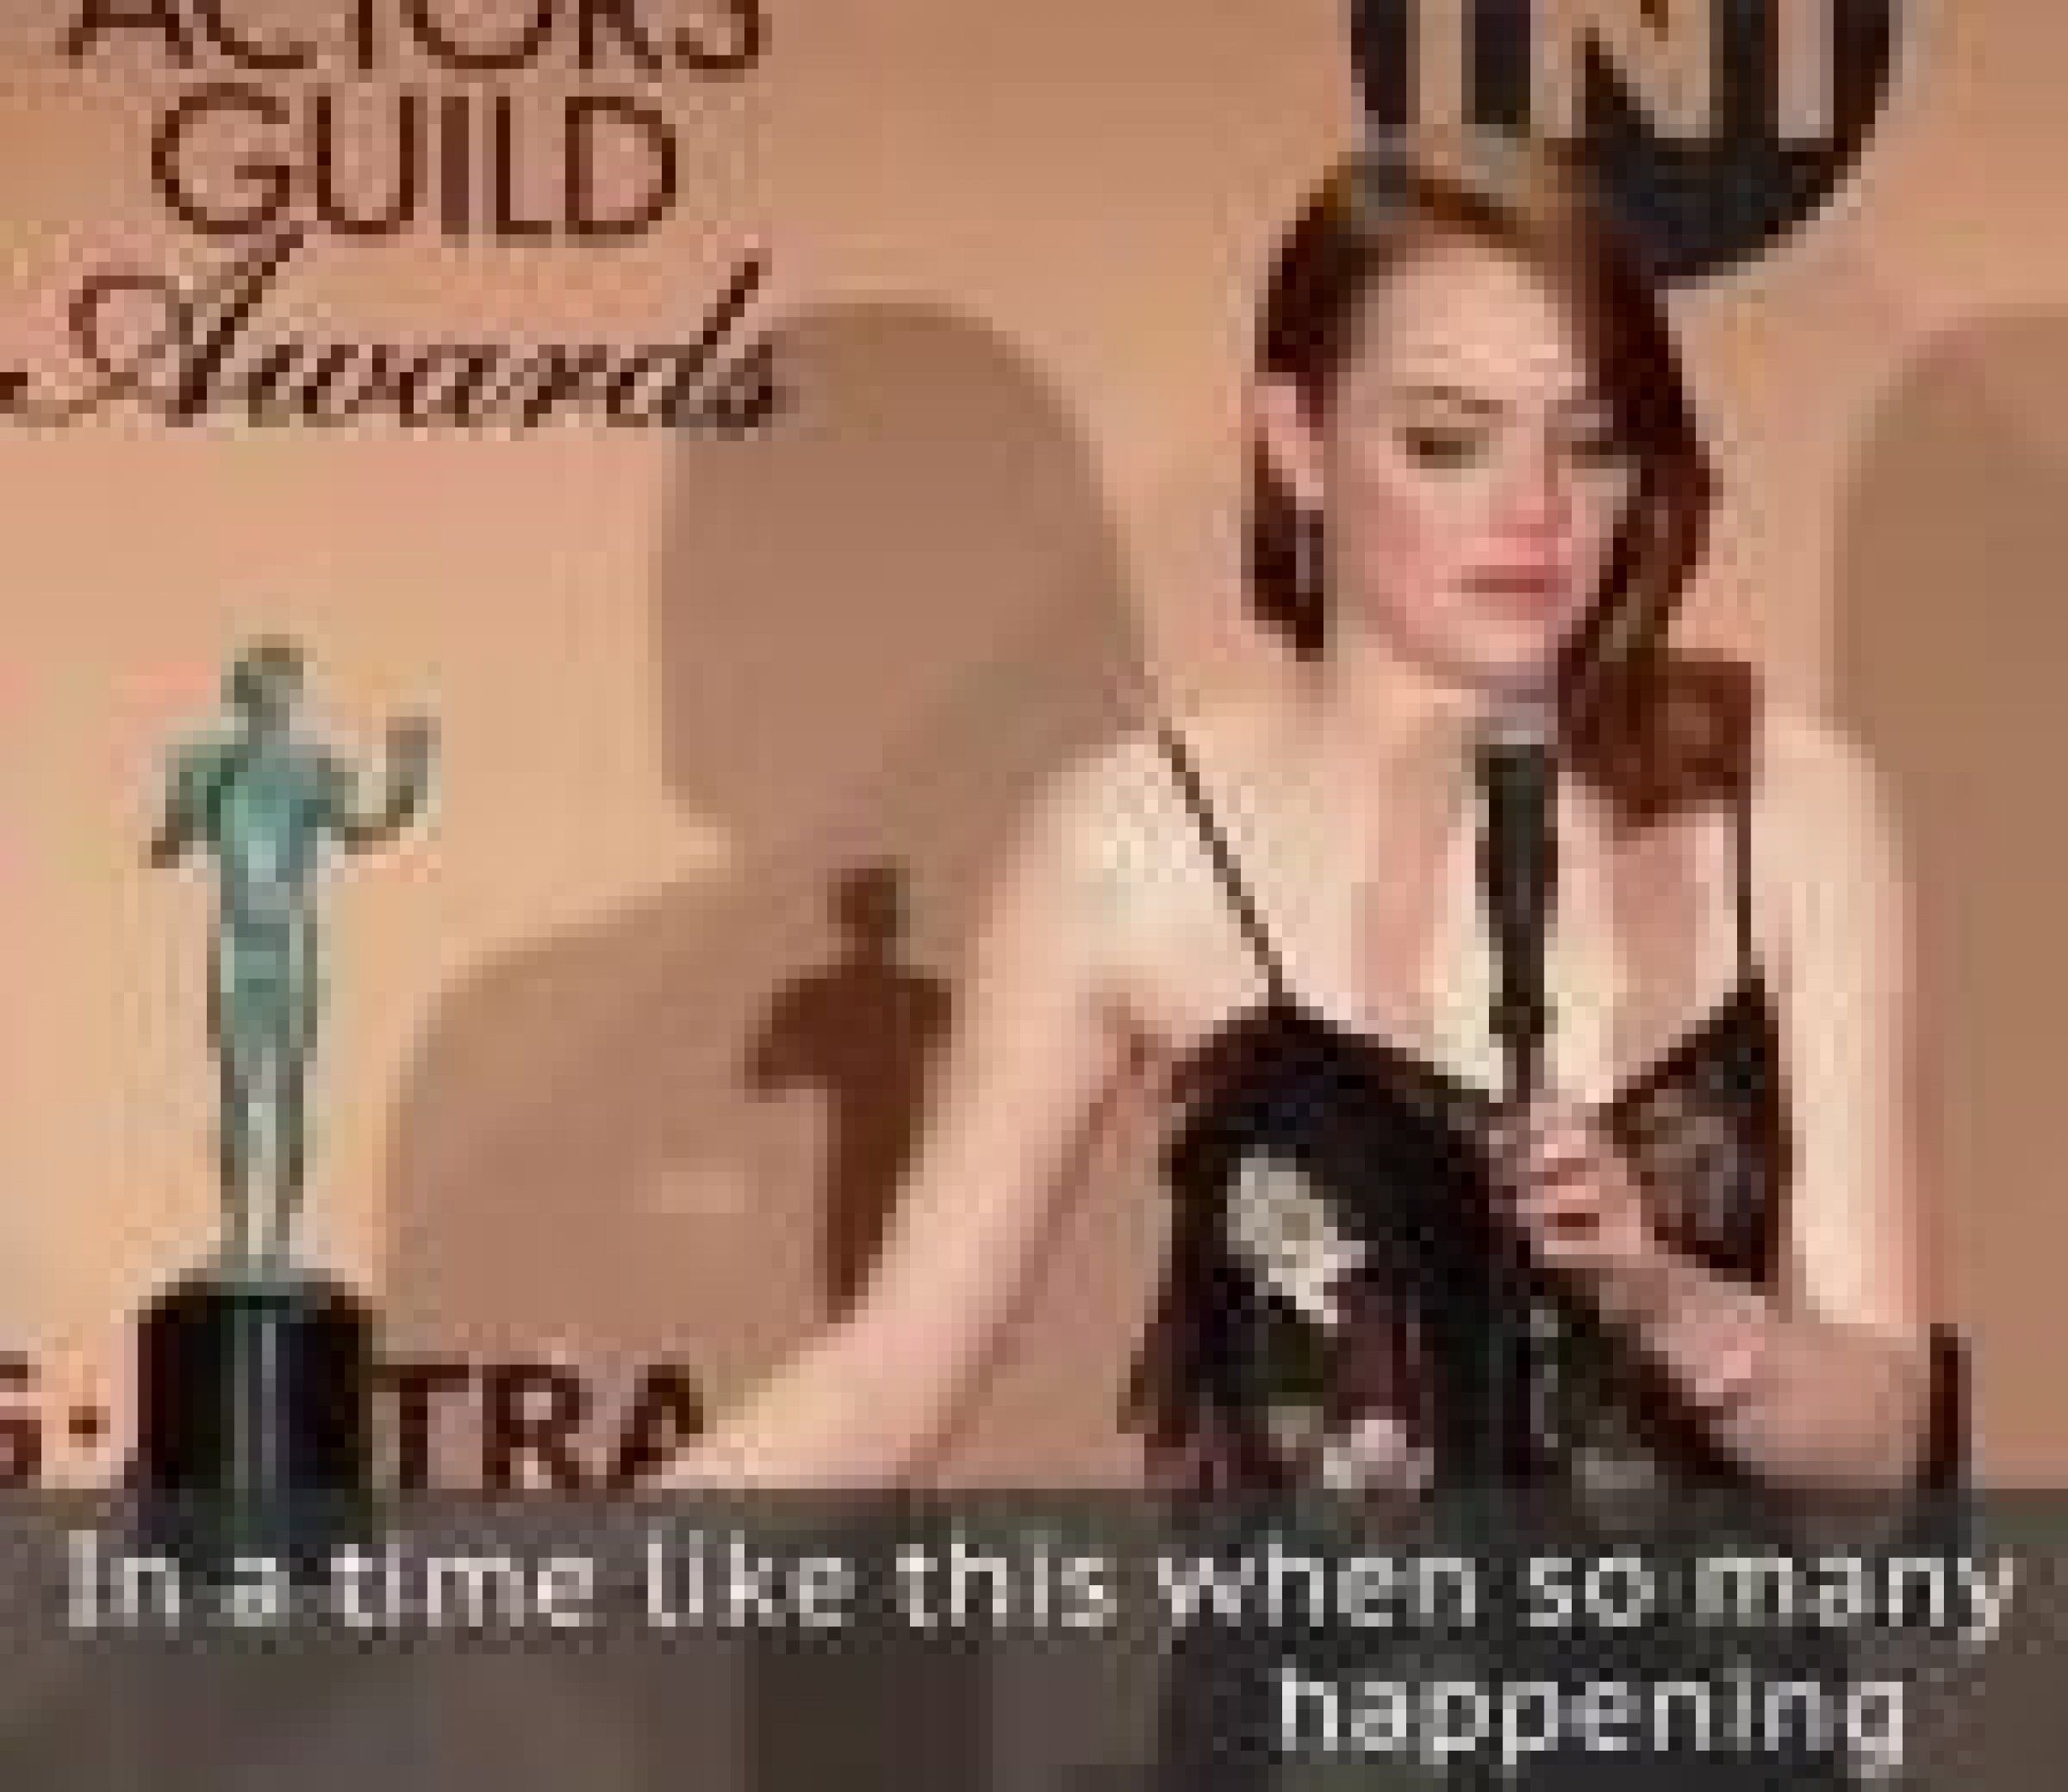 SAG awards Emma Stone calls for action and unity to speak up against injustice